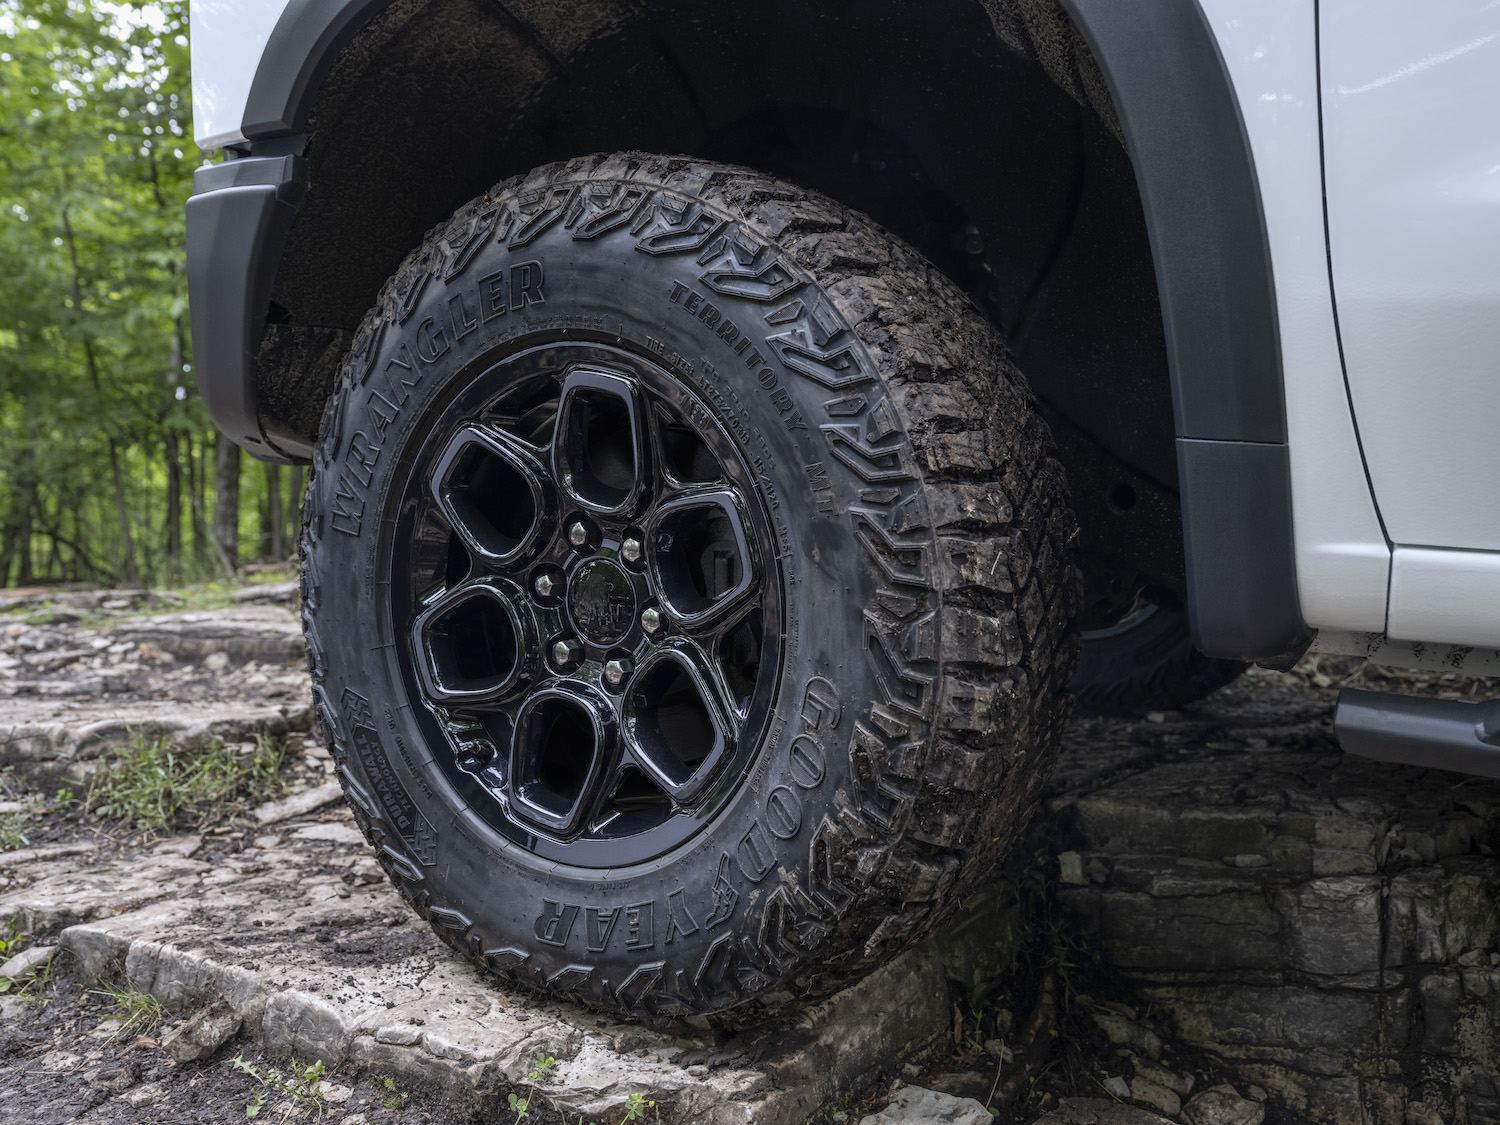 Closeup of the off-road rims available on the Chevrolet Silverado 1500 pickup truck.